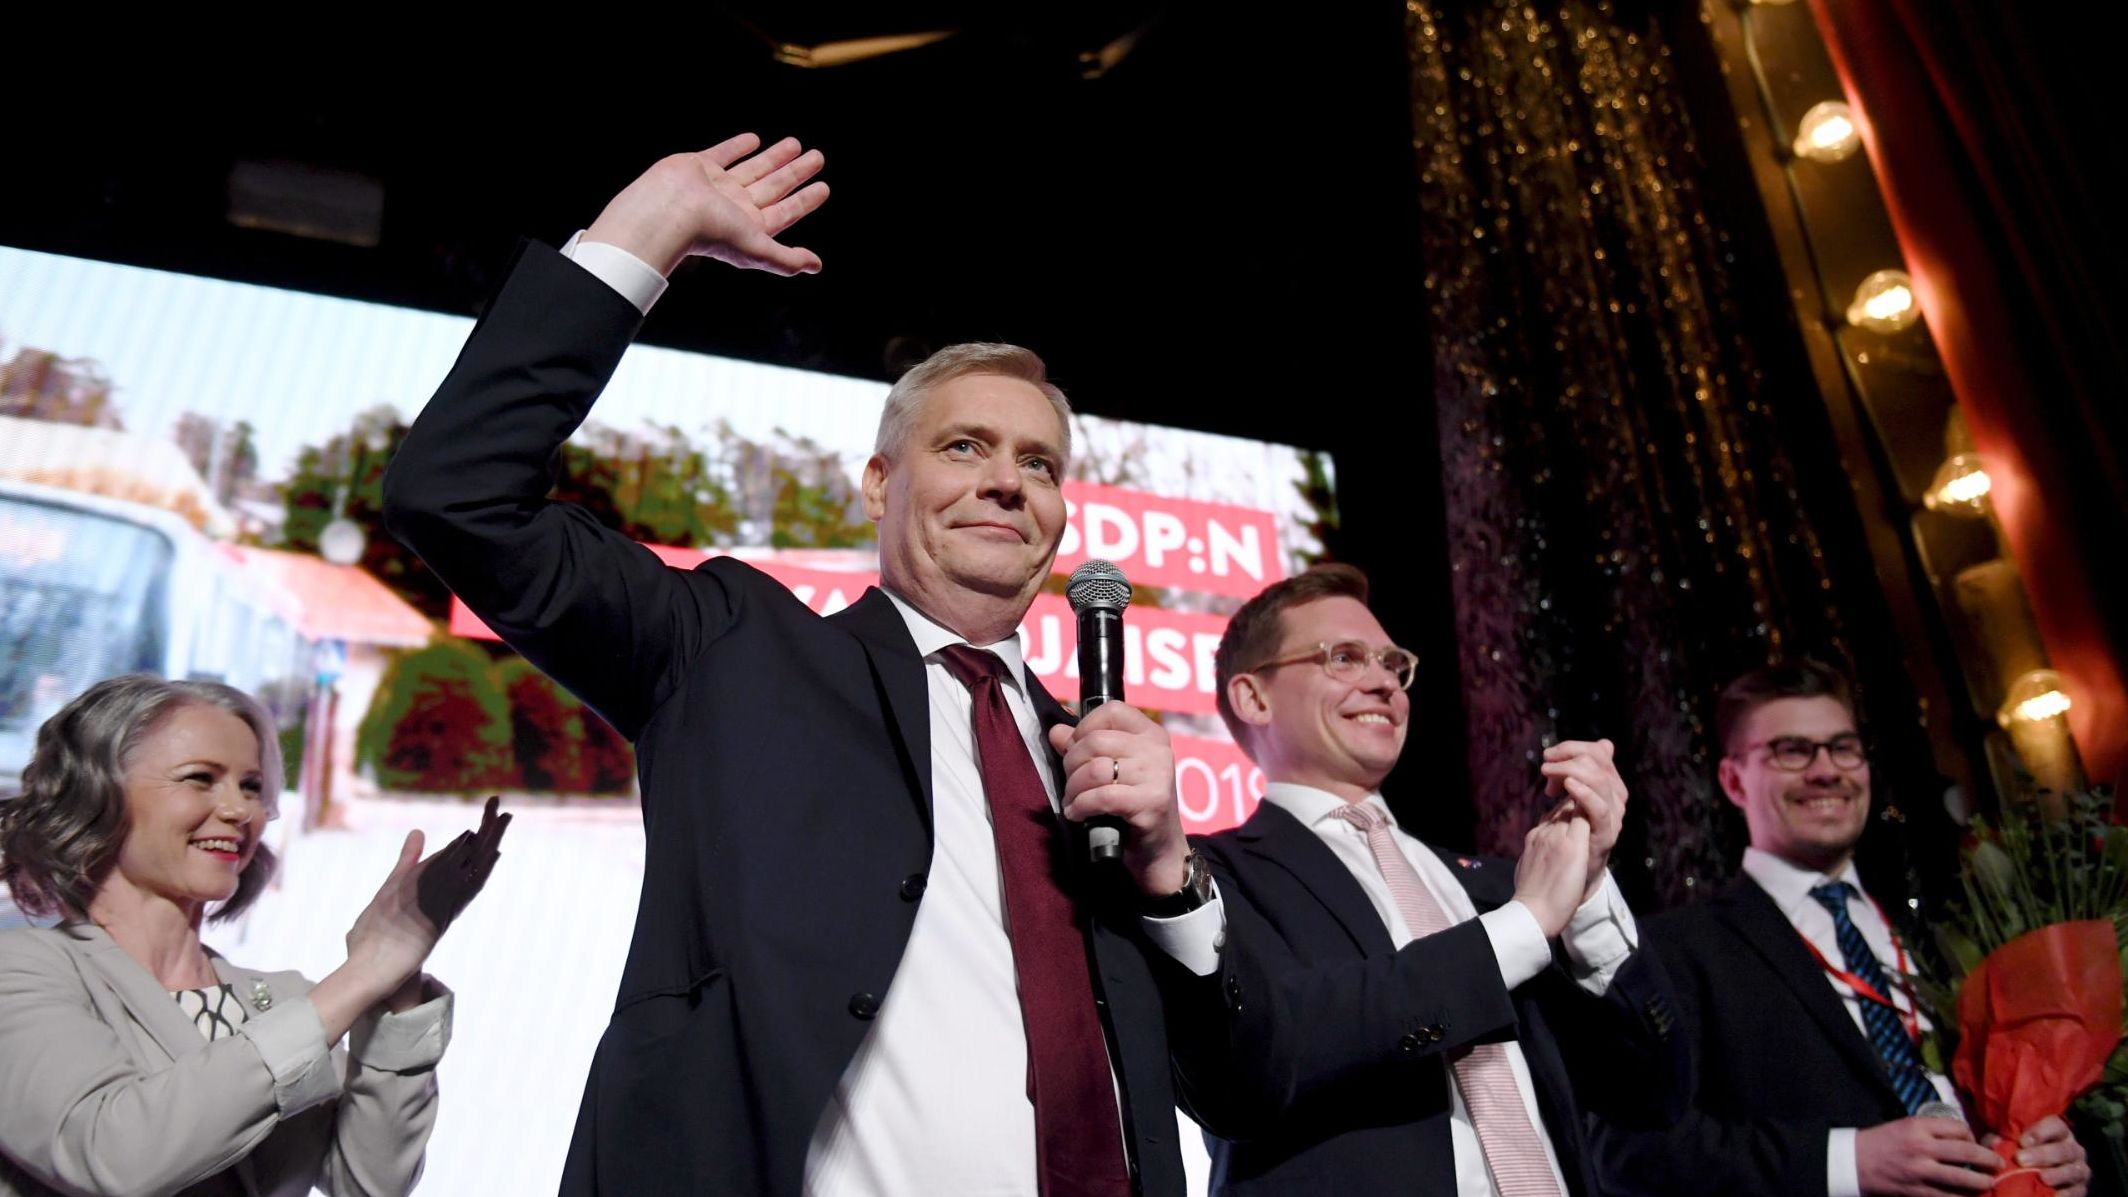 Chairman of the Finnish Social Democratic Party Antti Rinne (center) his wife Heta Ravolainen-Rinne (left) and Party Secretary Antton Rönnholm (second right) celebrate at their election party in Helsinki, Finland on April 14, 2019.